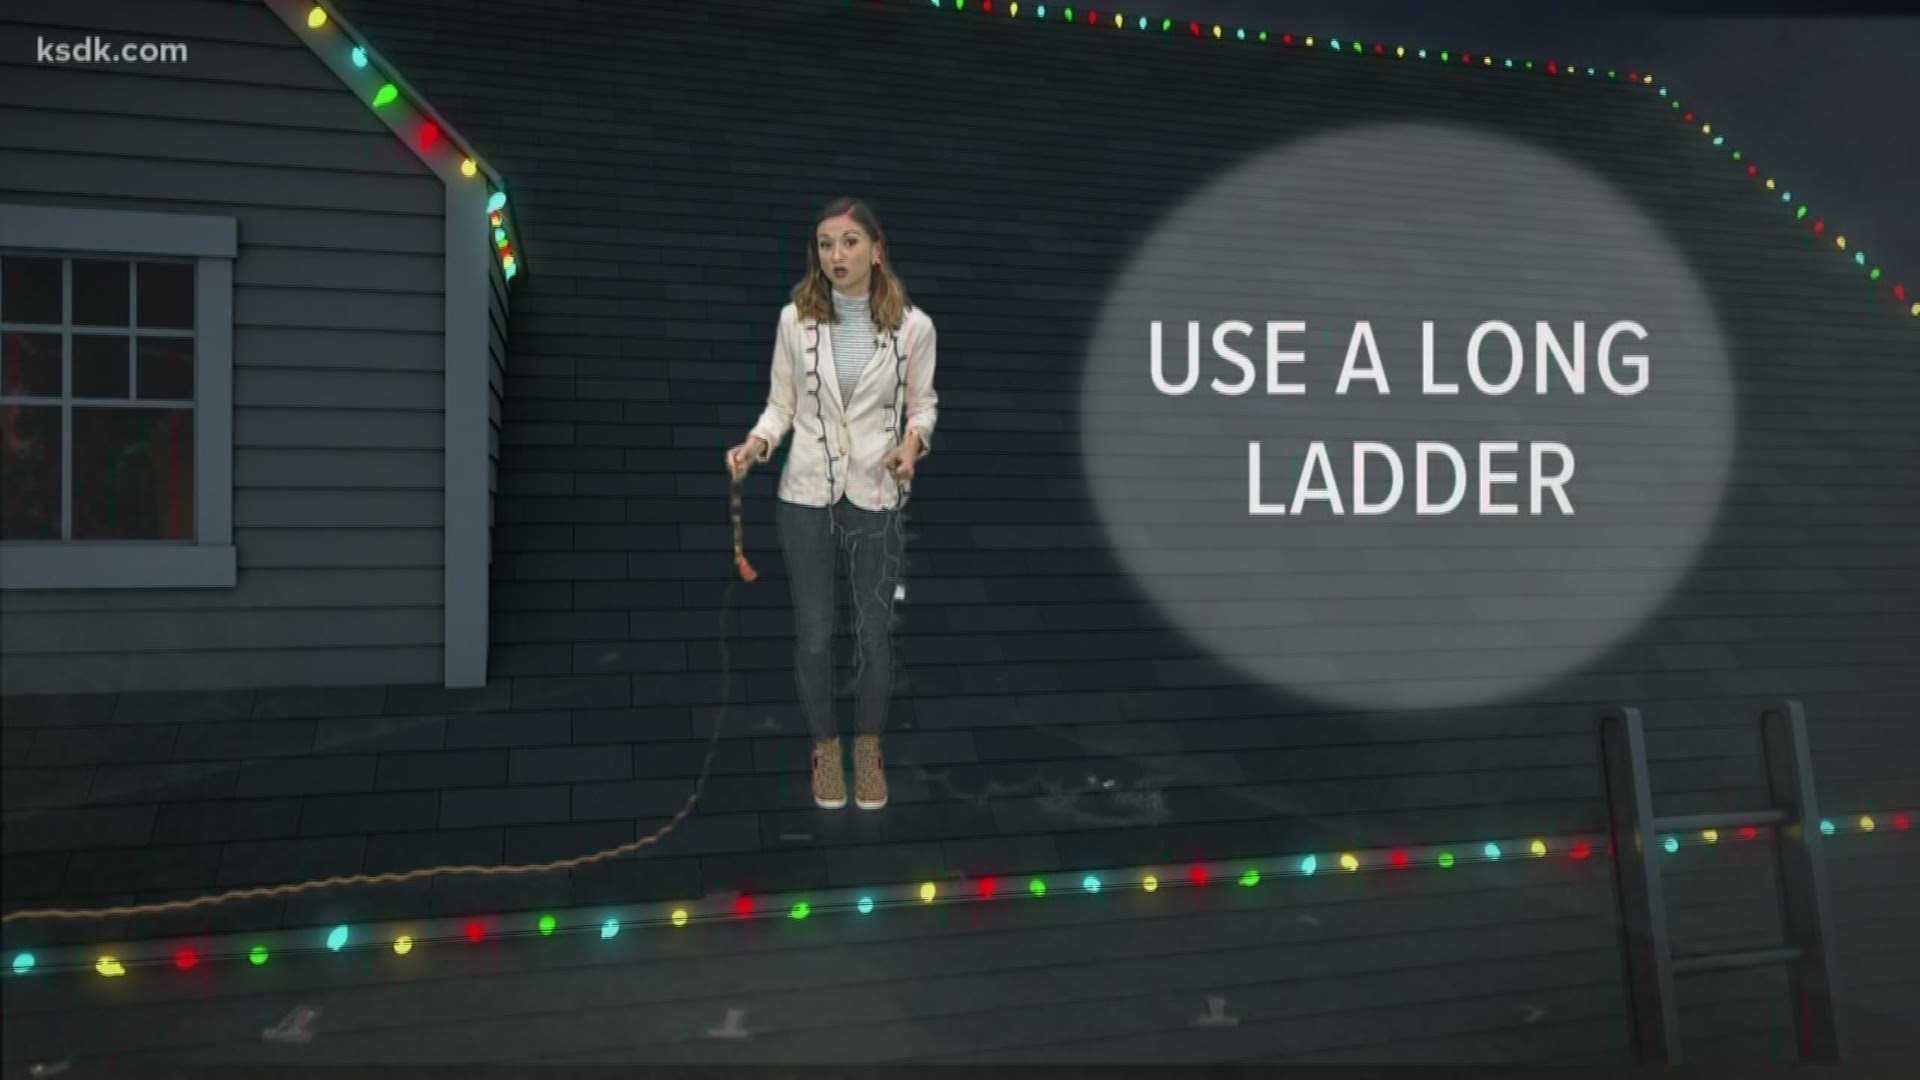 Hundreds of people are hurt every day decorating for the holidays. Don't be one of them.